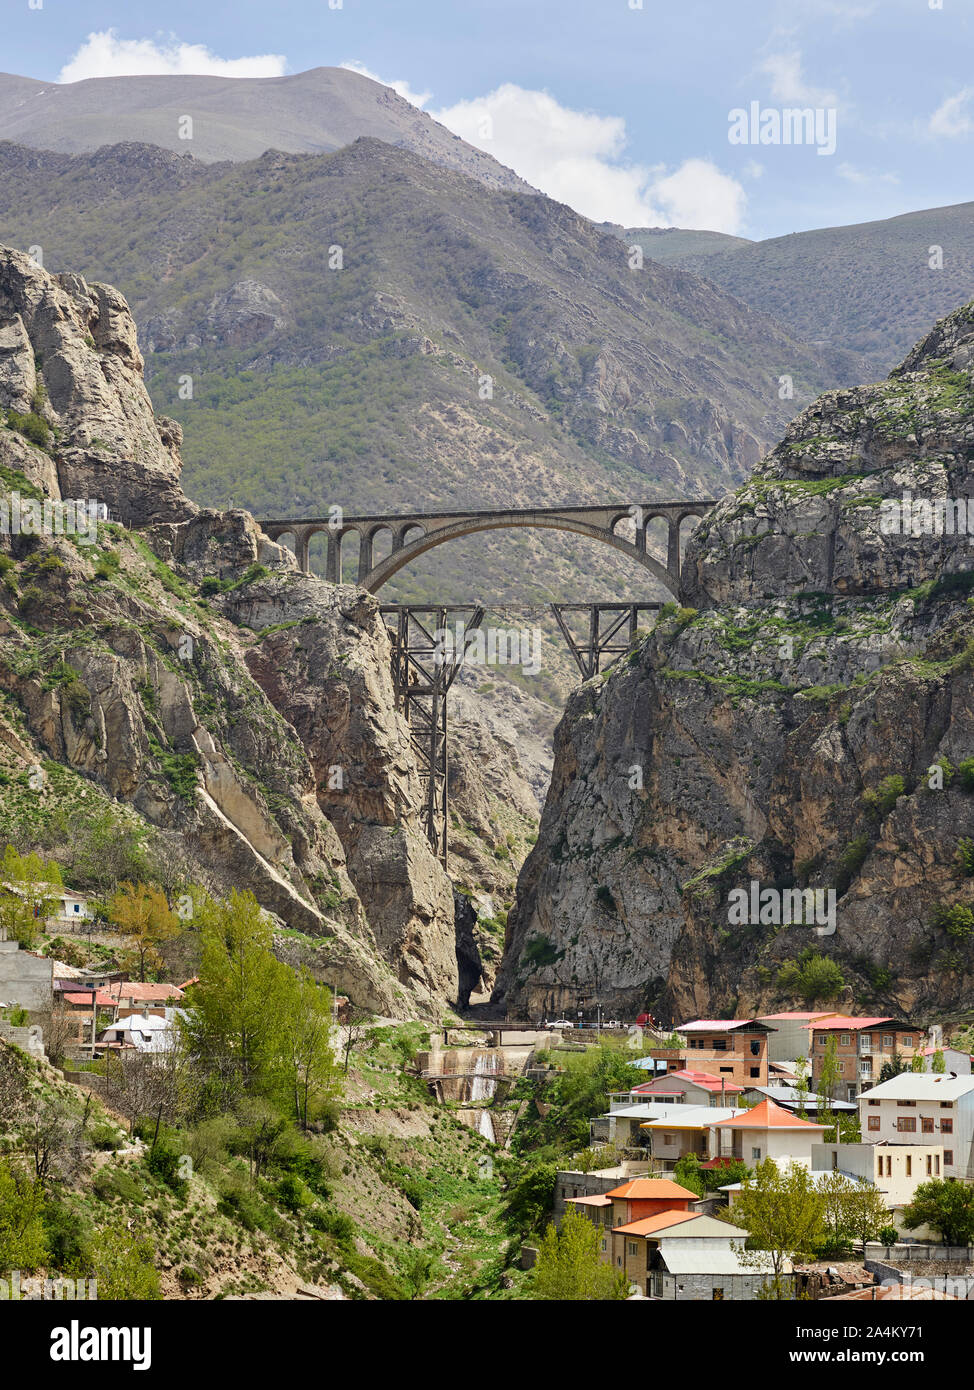 The Veresk railway bridge over the same place in the north of Iran in the  Elburs mountains, taken on 25.04.2018. The bridge was built under the  direction of the Austrian engineer Walter